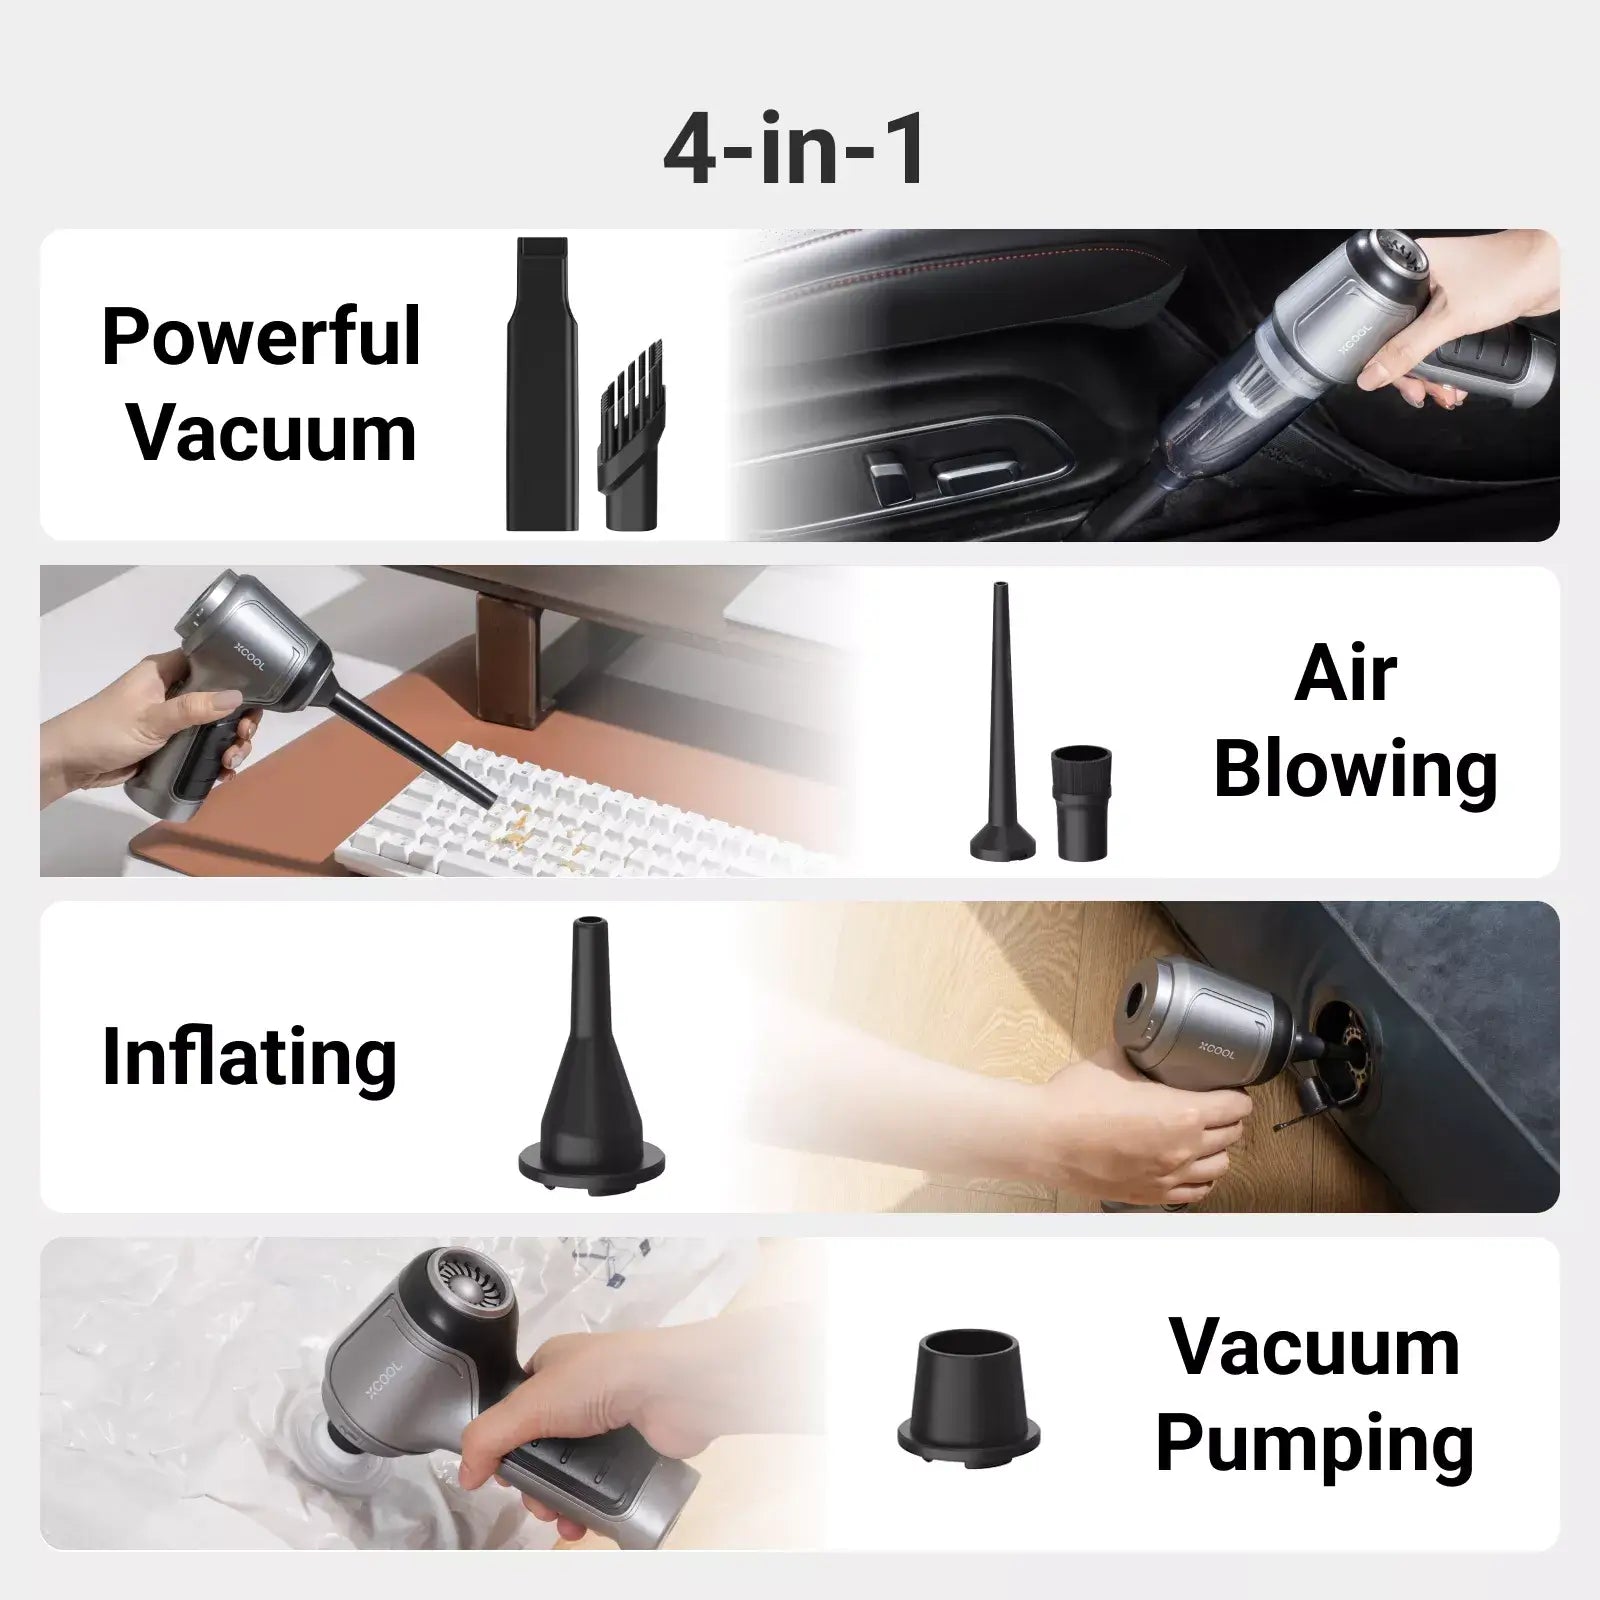 xCool Small Wireless Handheld Car Vacuum Cleaner for Car, Home, Pet